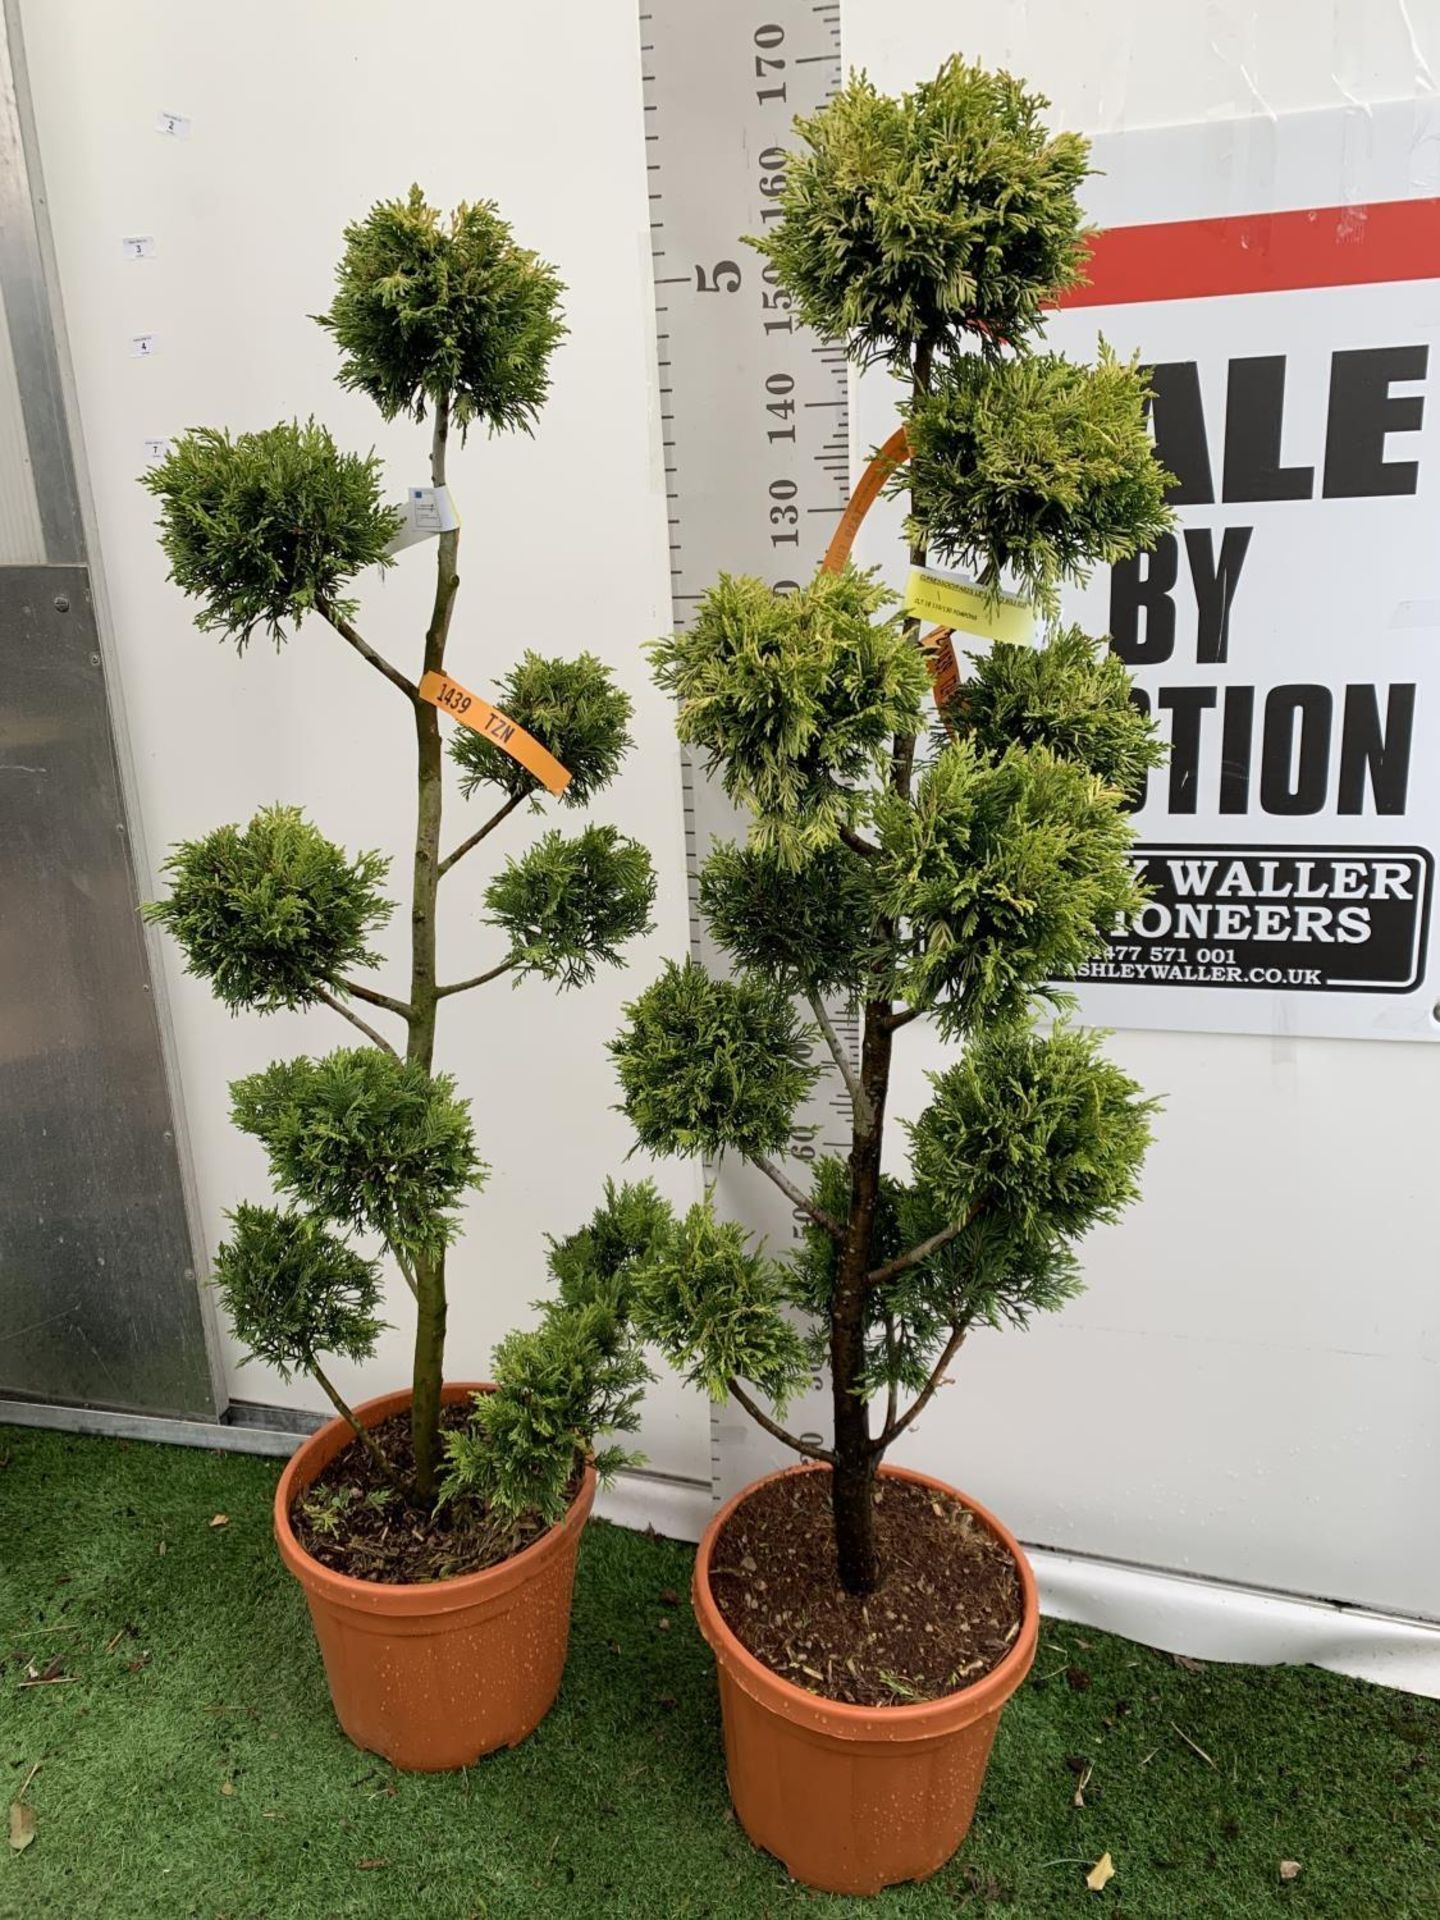 TWO POM POM TREES CUPRESSOCYPARIS LEYLANDII 'GOLD RIDER' APPROX 160CM IN HEIGHT IN 15 LTR POTS - Image 4 of 10